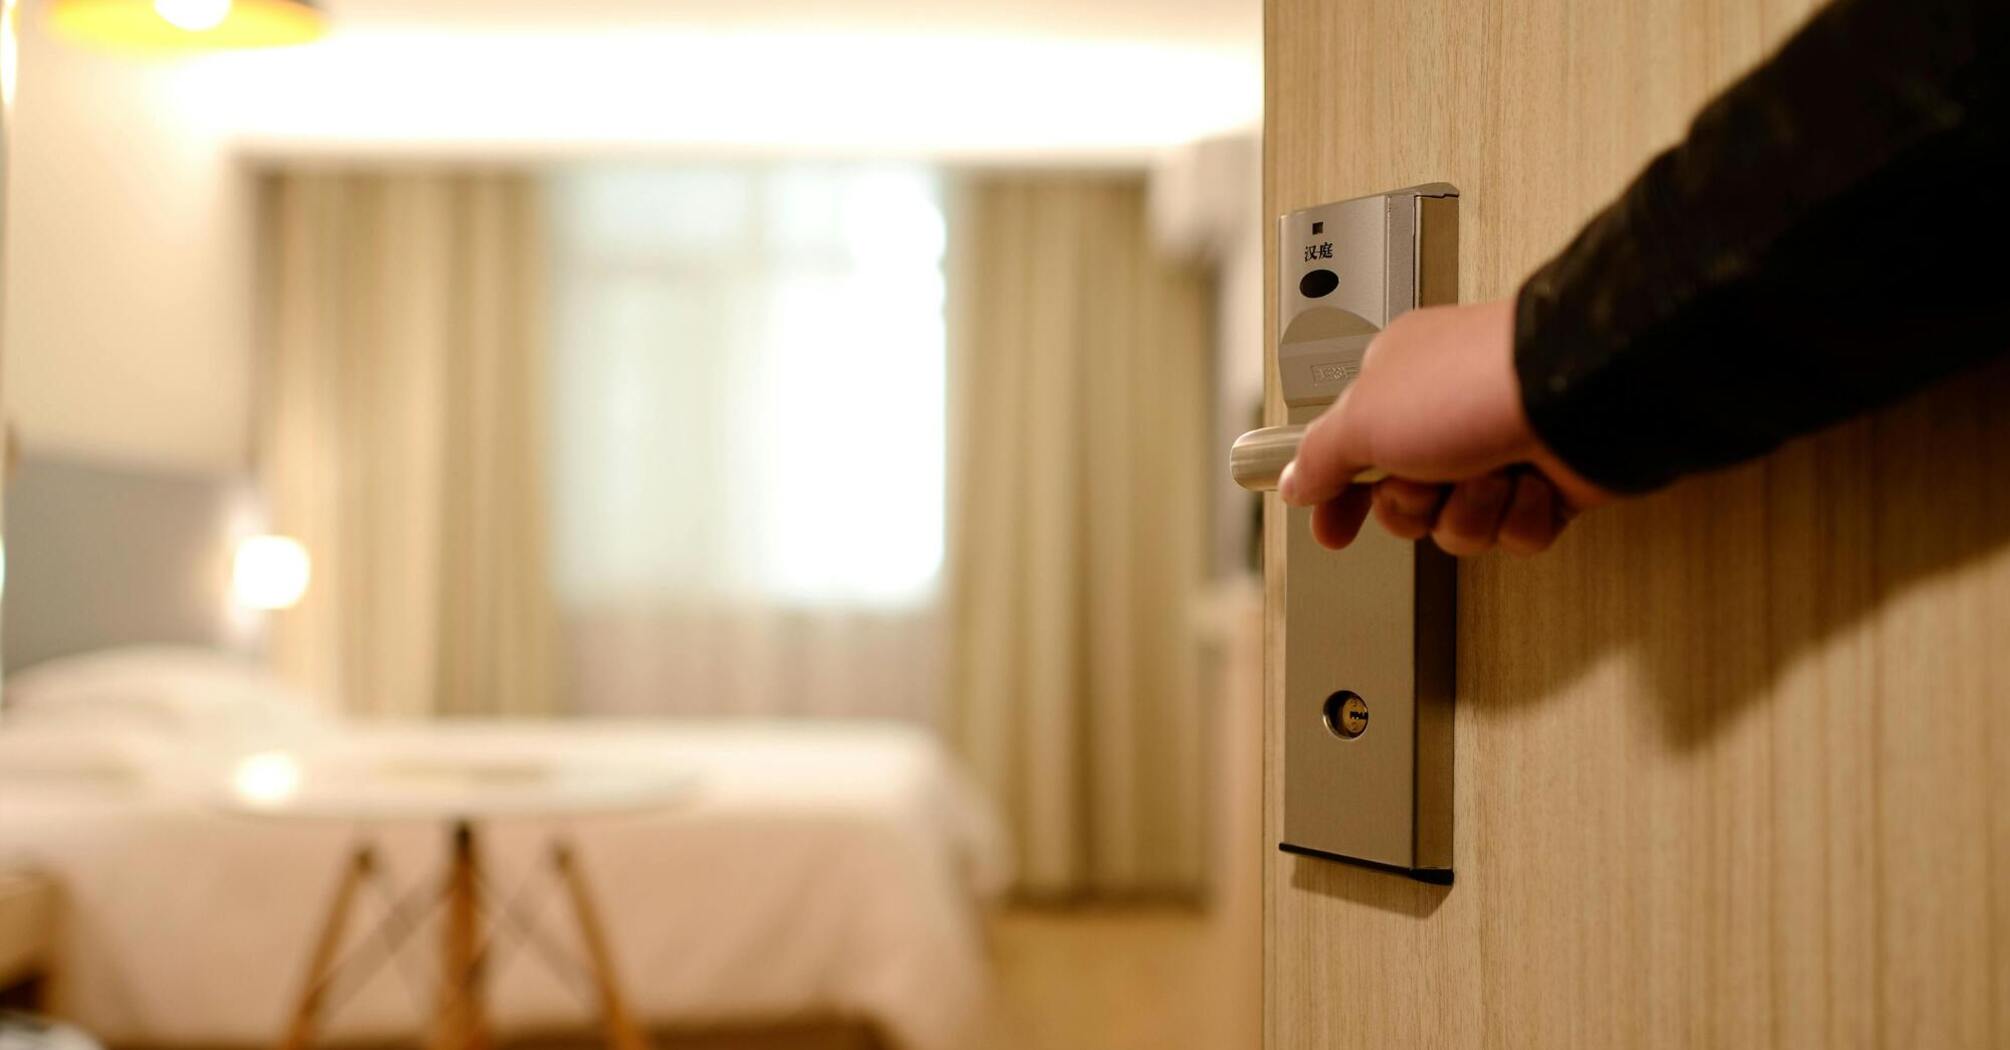 Hotel occupancy is returning to pre-pandemic levels